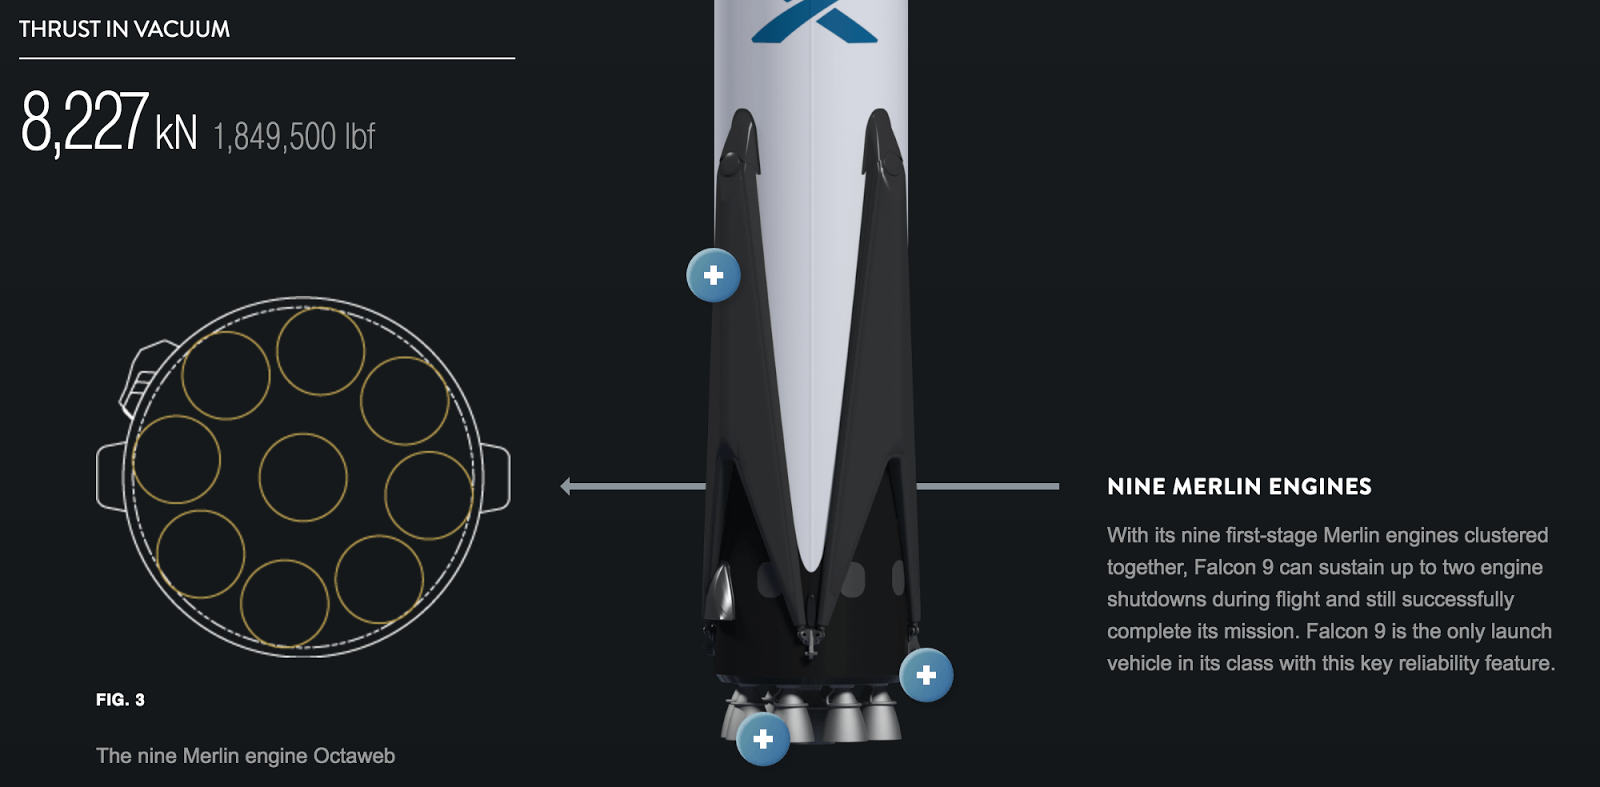 SpaceX Falcon 9 Heavy Logo - Spacex Falcon 9 launch payload increased by 73% to 800 kilograms